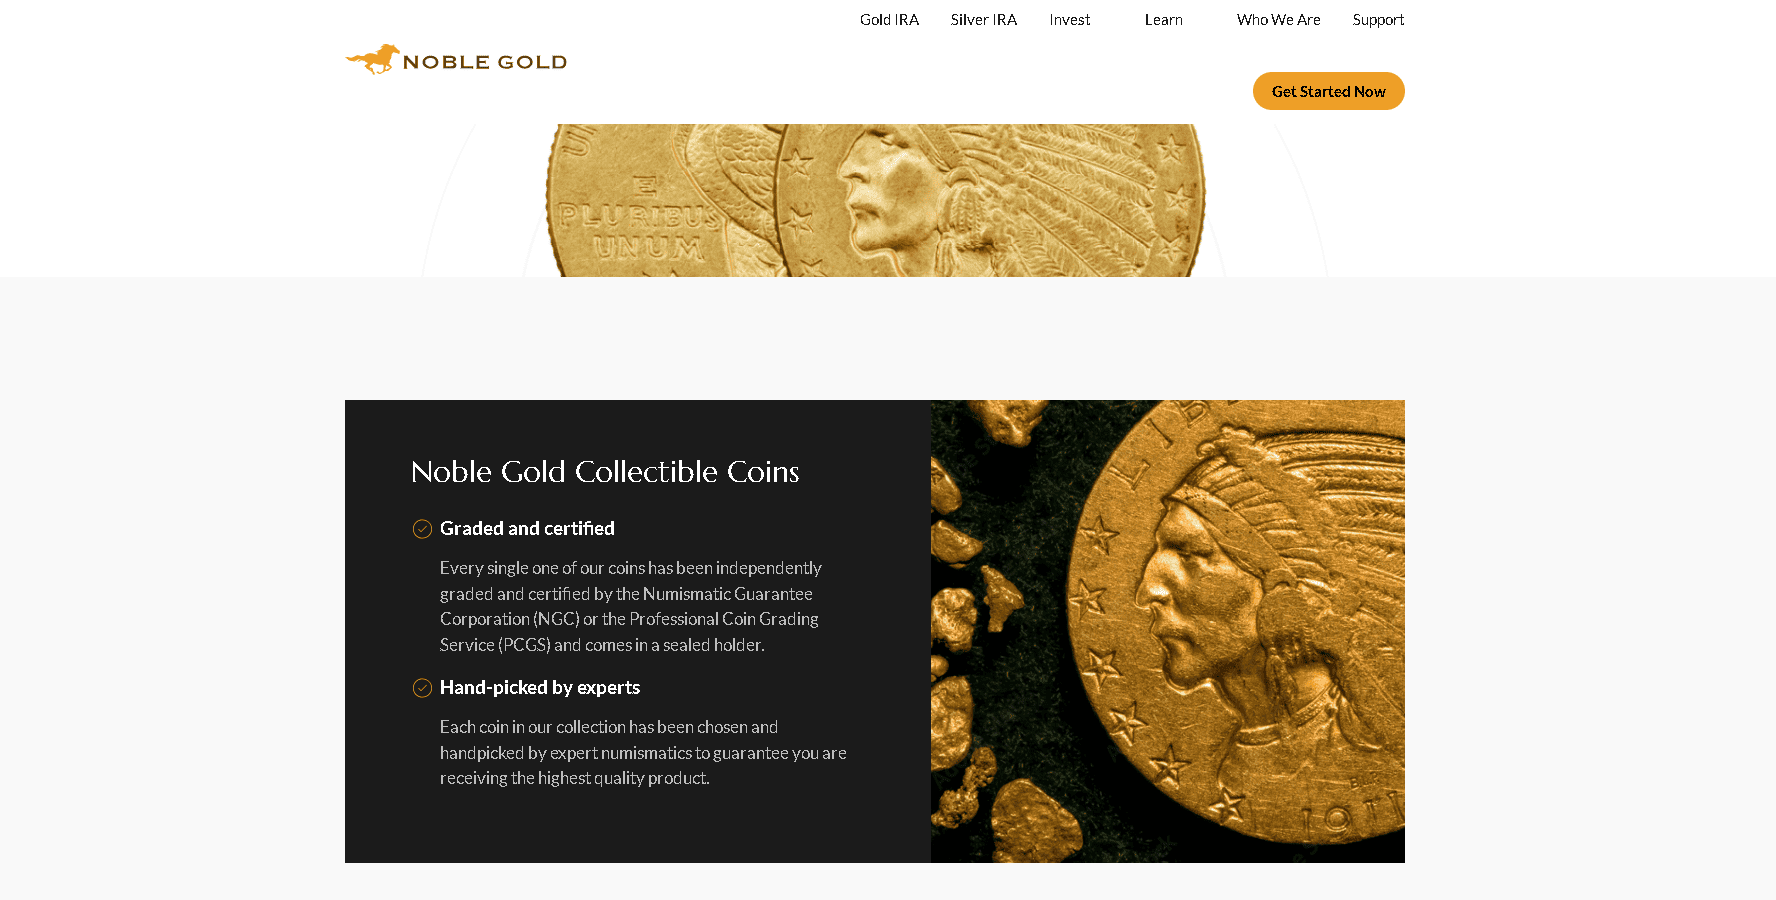 Invest in rare coins with Noble Gold Investments